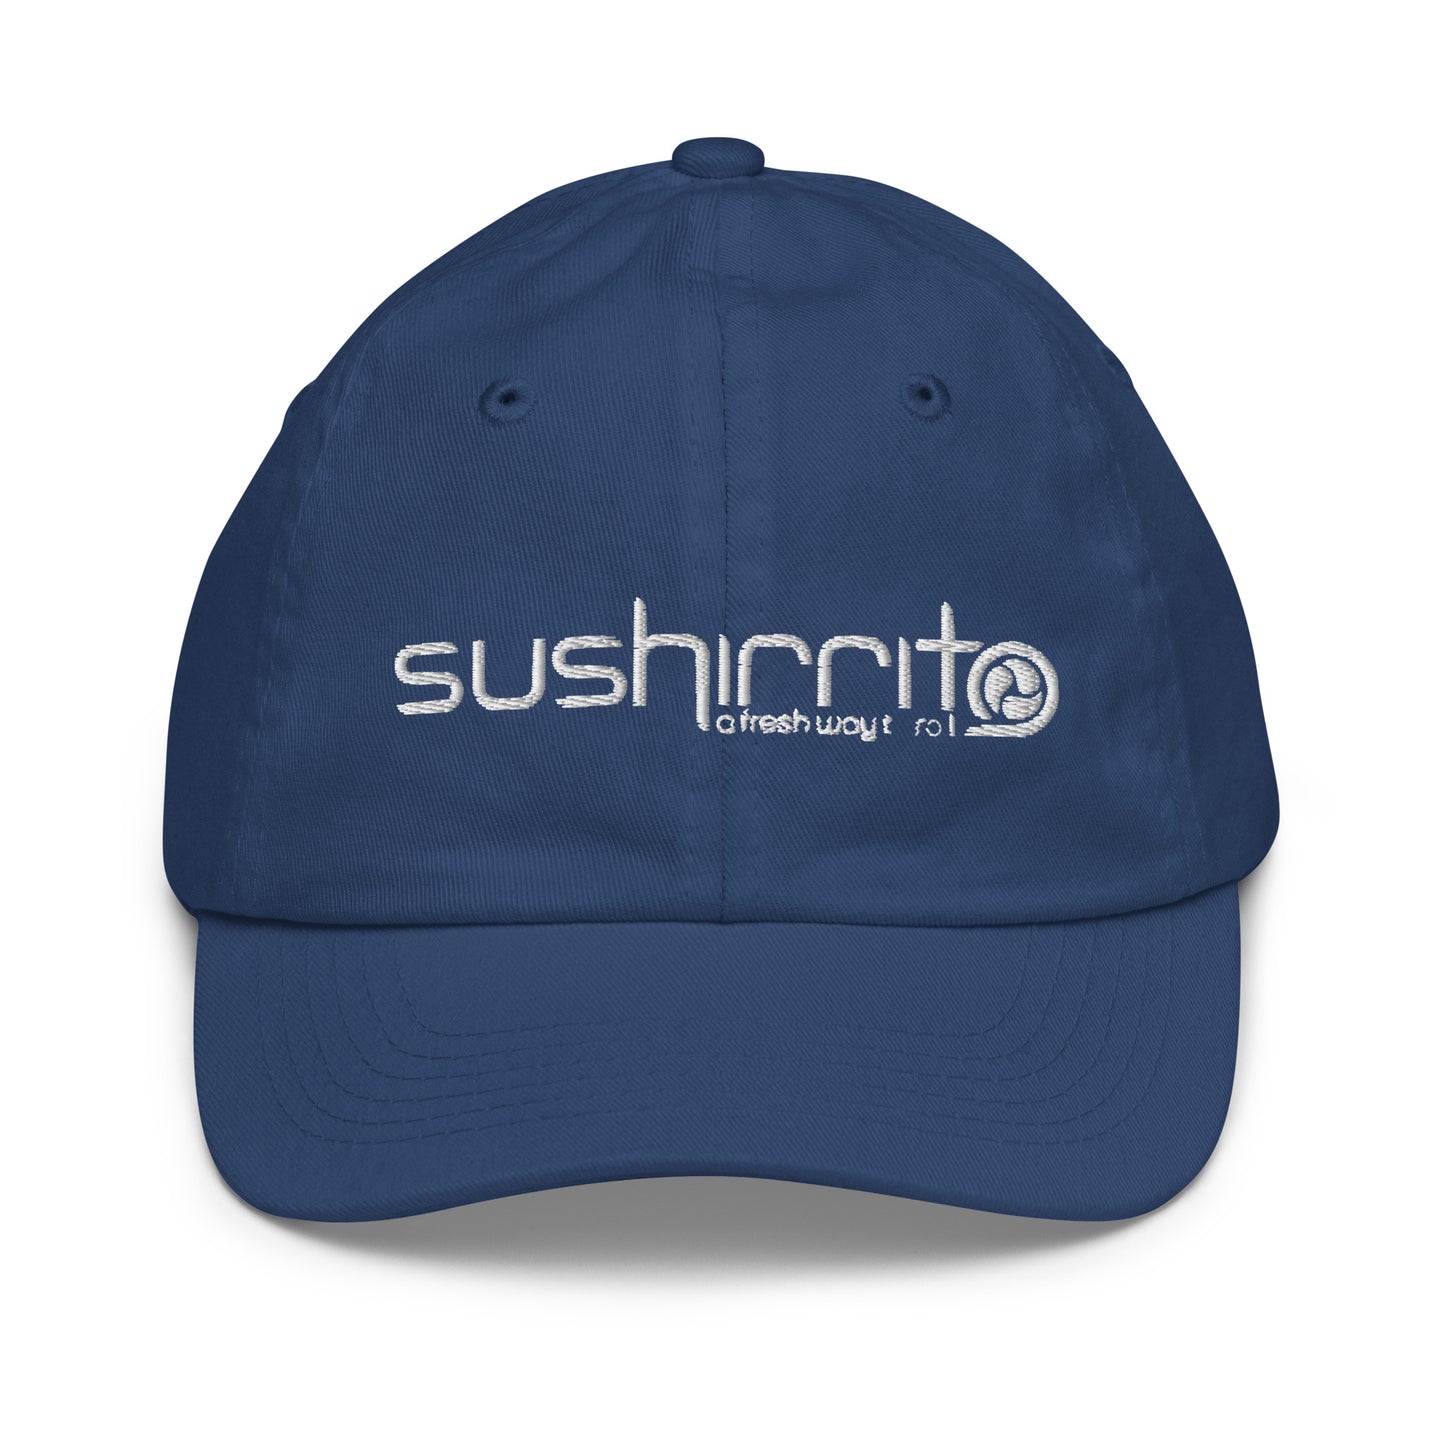 Youth Navy Blue Hat